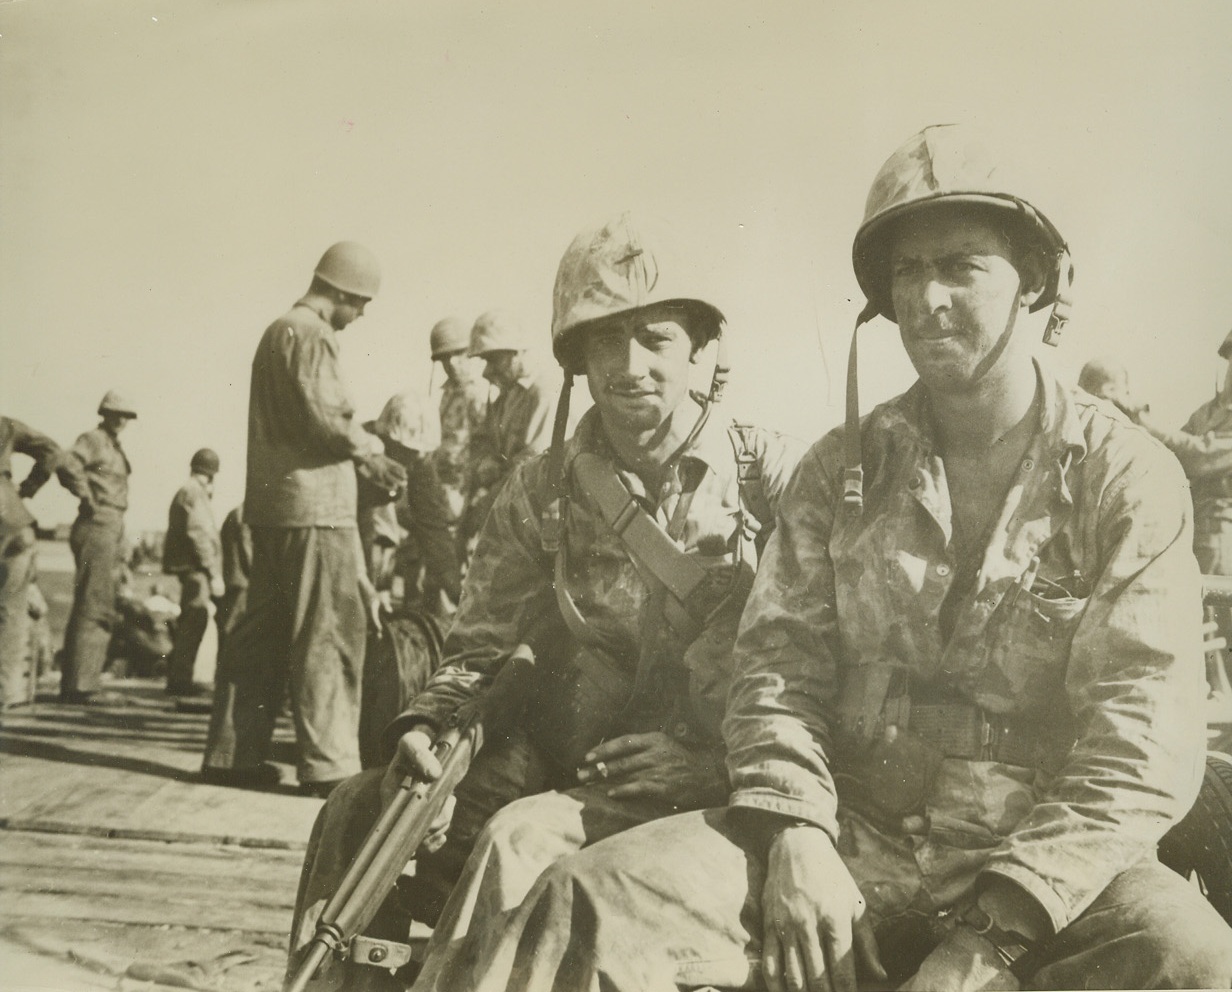 Southerners in Fray, 12/1/1943. Tarawa, G.I. - - Both Southerners, both Marines, Lt. Cecil Brown (L), 27, of Tallassee, Alabama, and Lt. Roy H. Elrod, 24, of Muleshier (??- - - postal guide lists no such town, but does list Muleshoe), Texas, rest on a pier after successful assault against Japanese of Tarawa.  Even while resting Lt. Brown keeps his rifle at the ready.Credit (ACME);